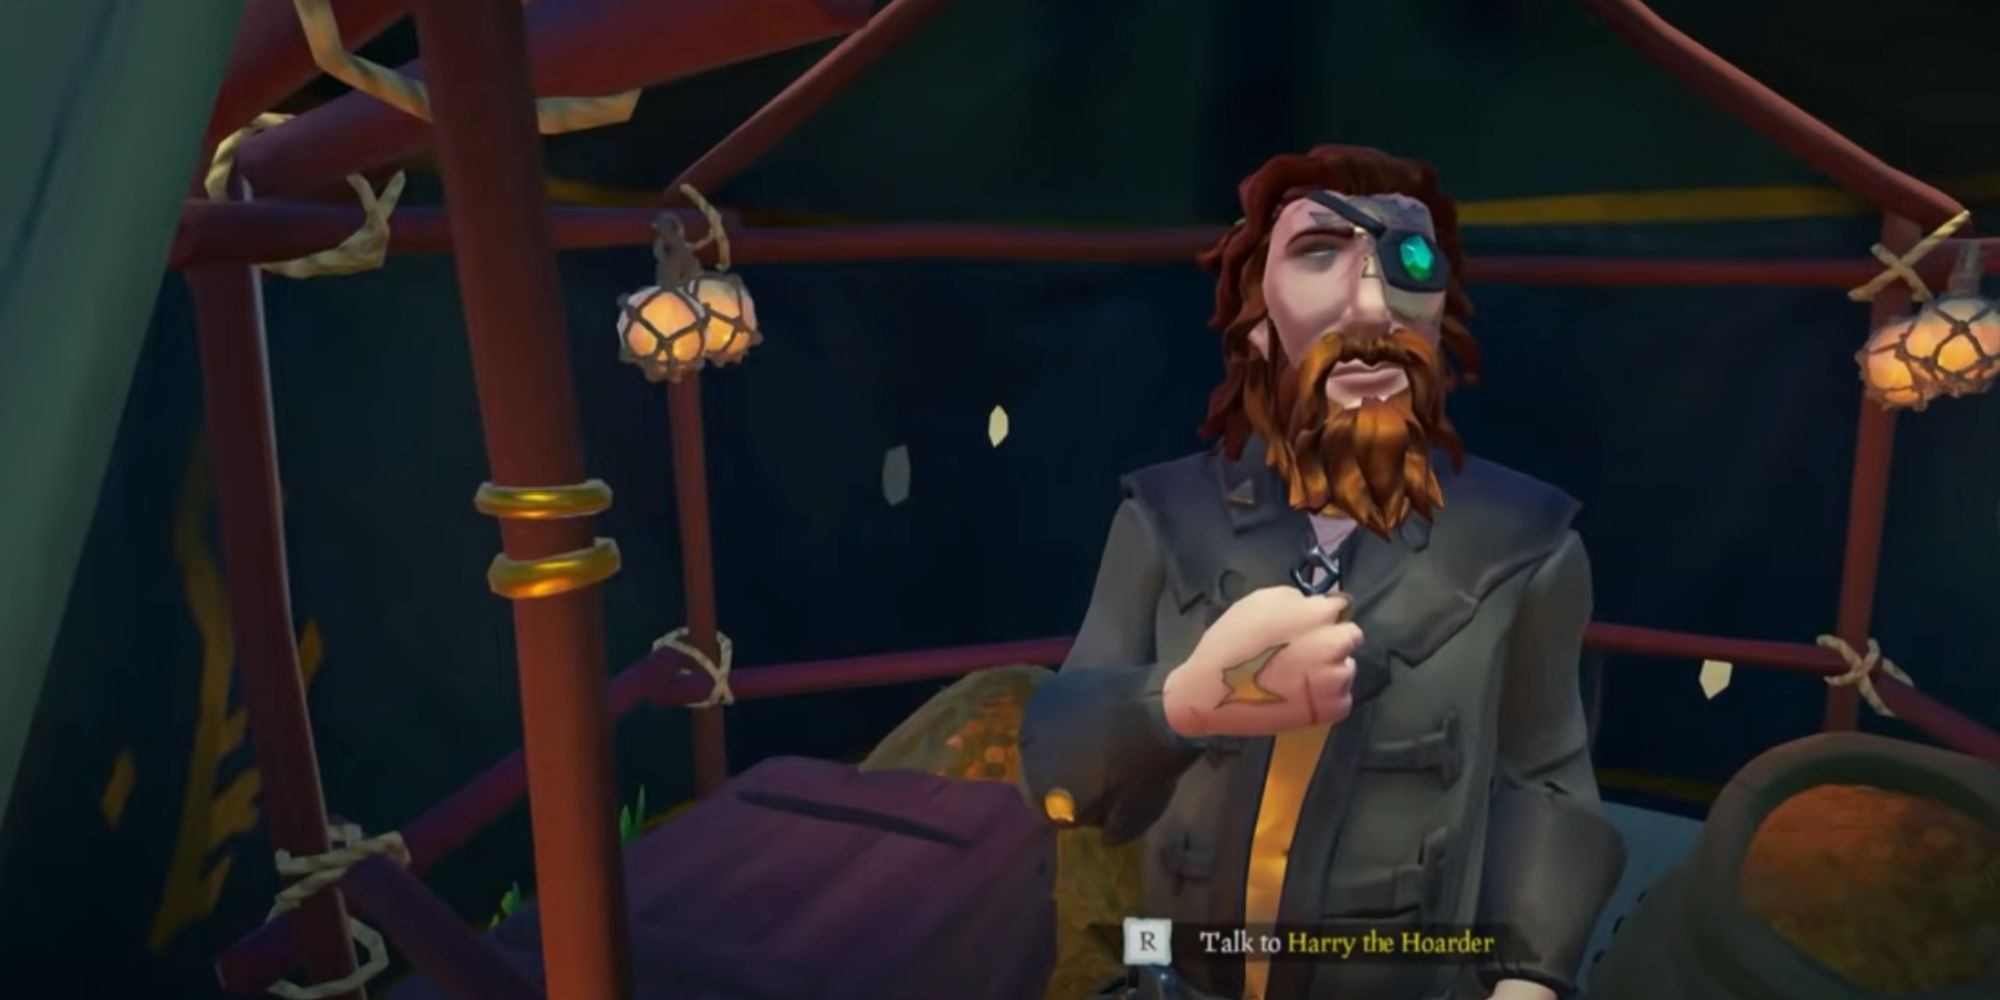 sea_of_thieves_harry_the_hoarder_character_at_an_outpost